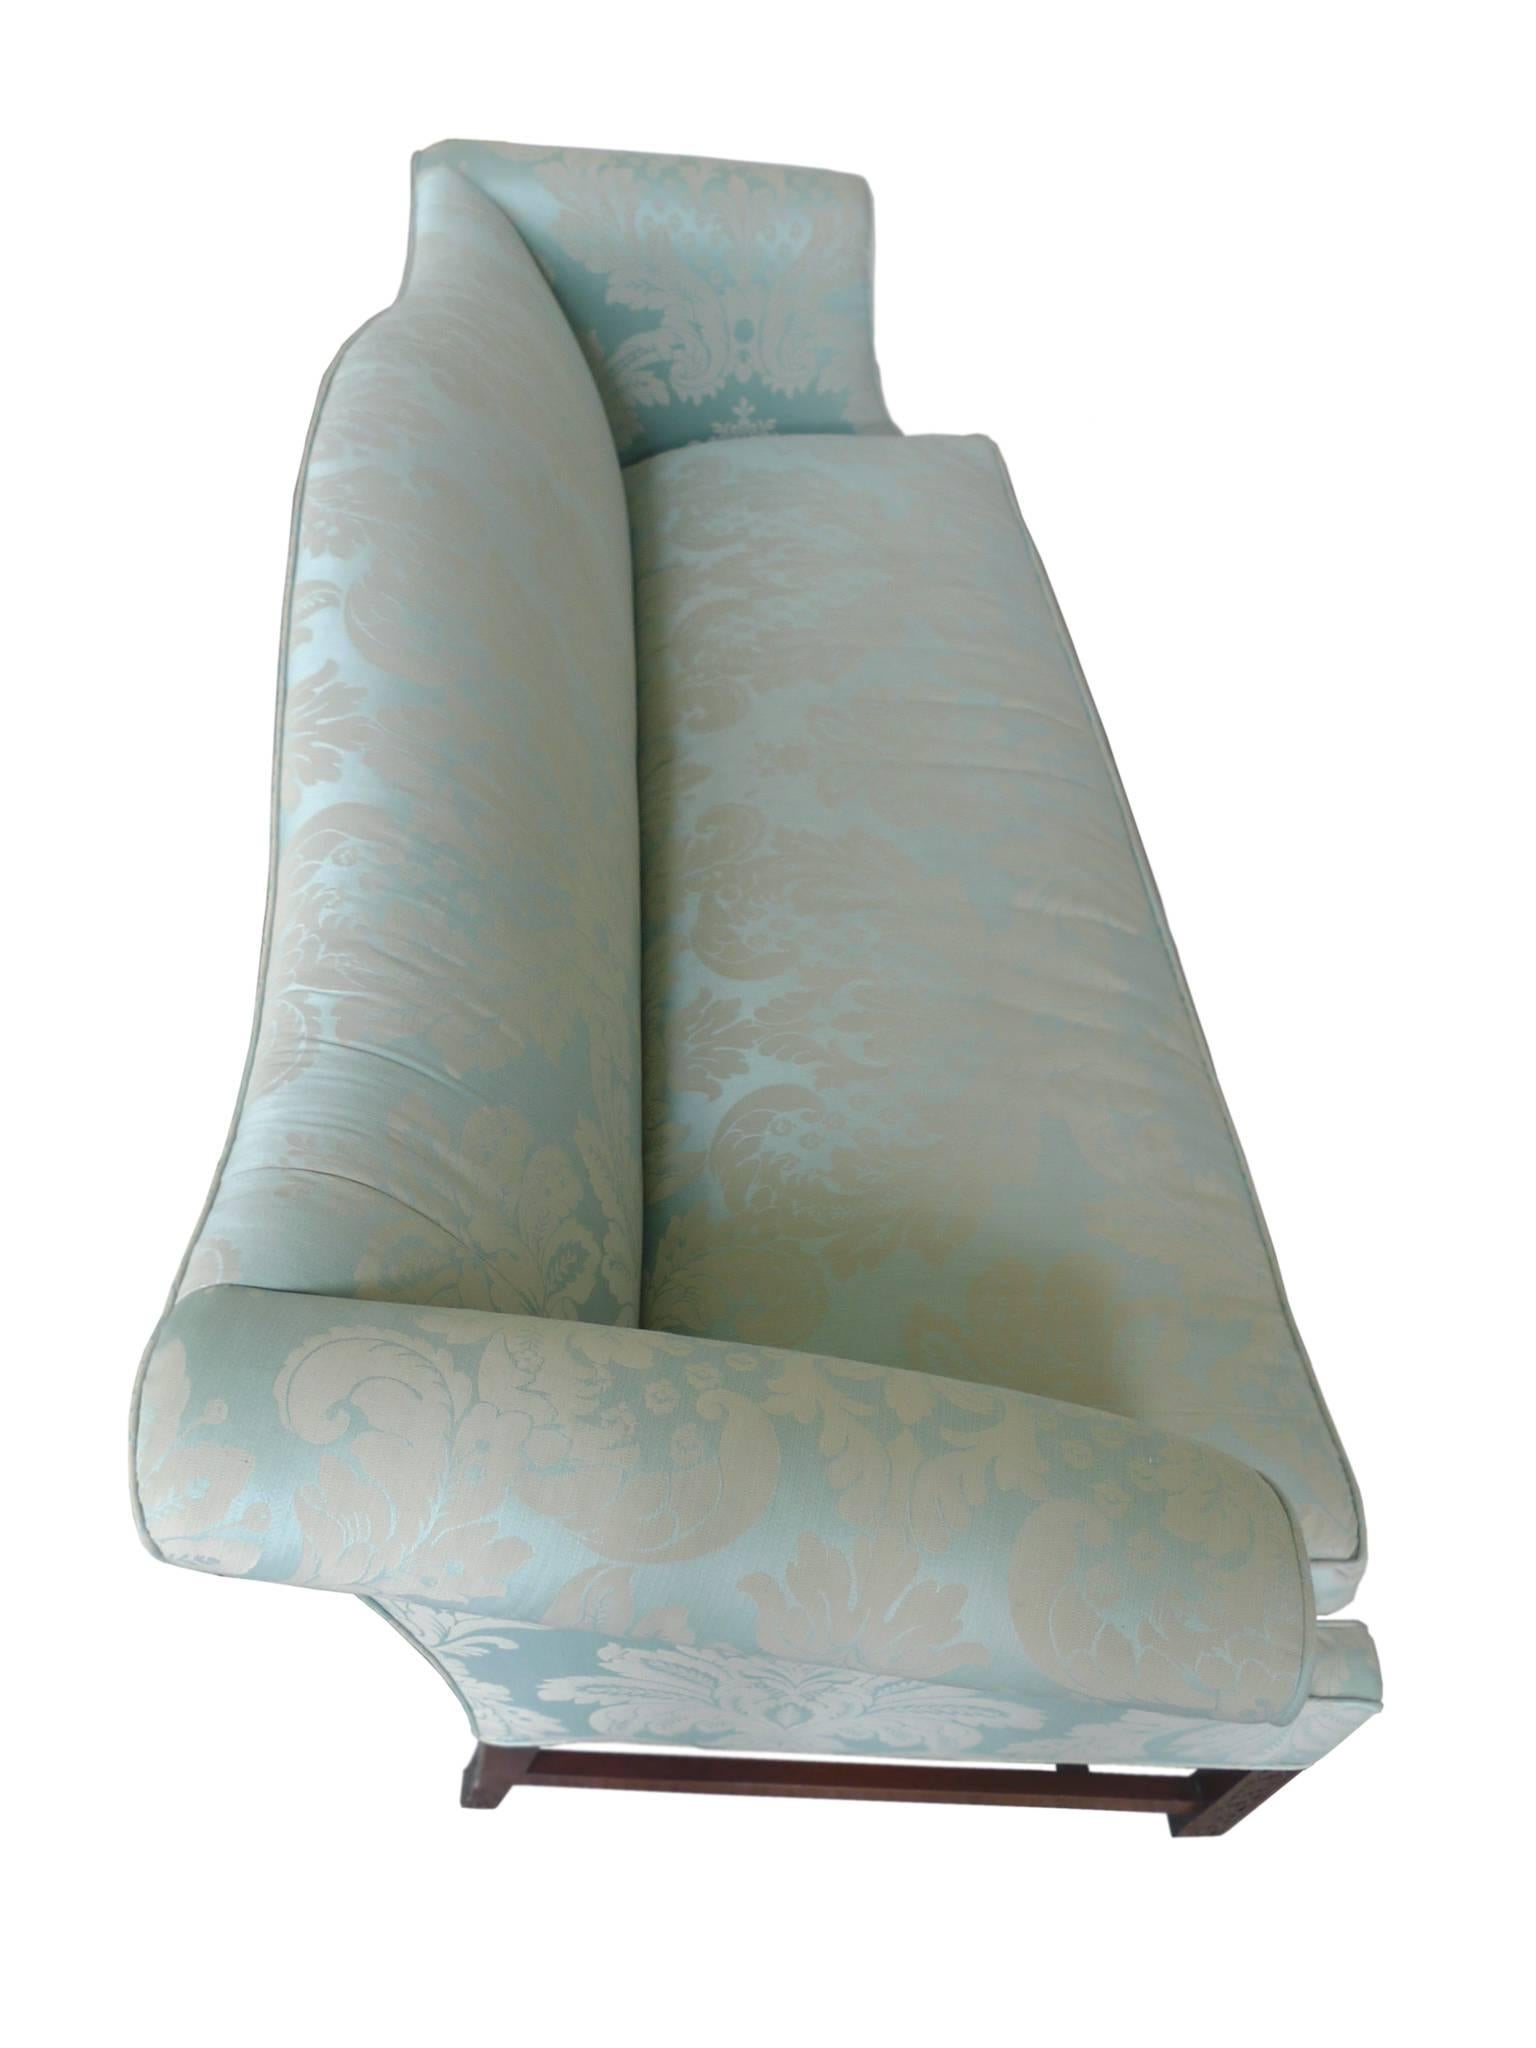 Damask 20th Century Chinese Chippendale Style Camelback Sofa